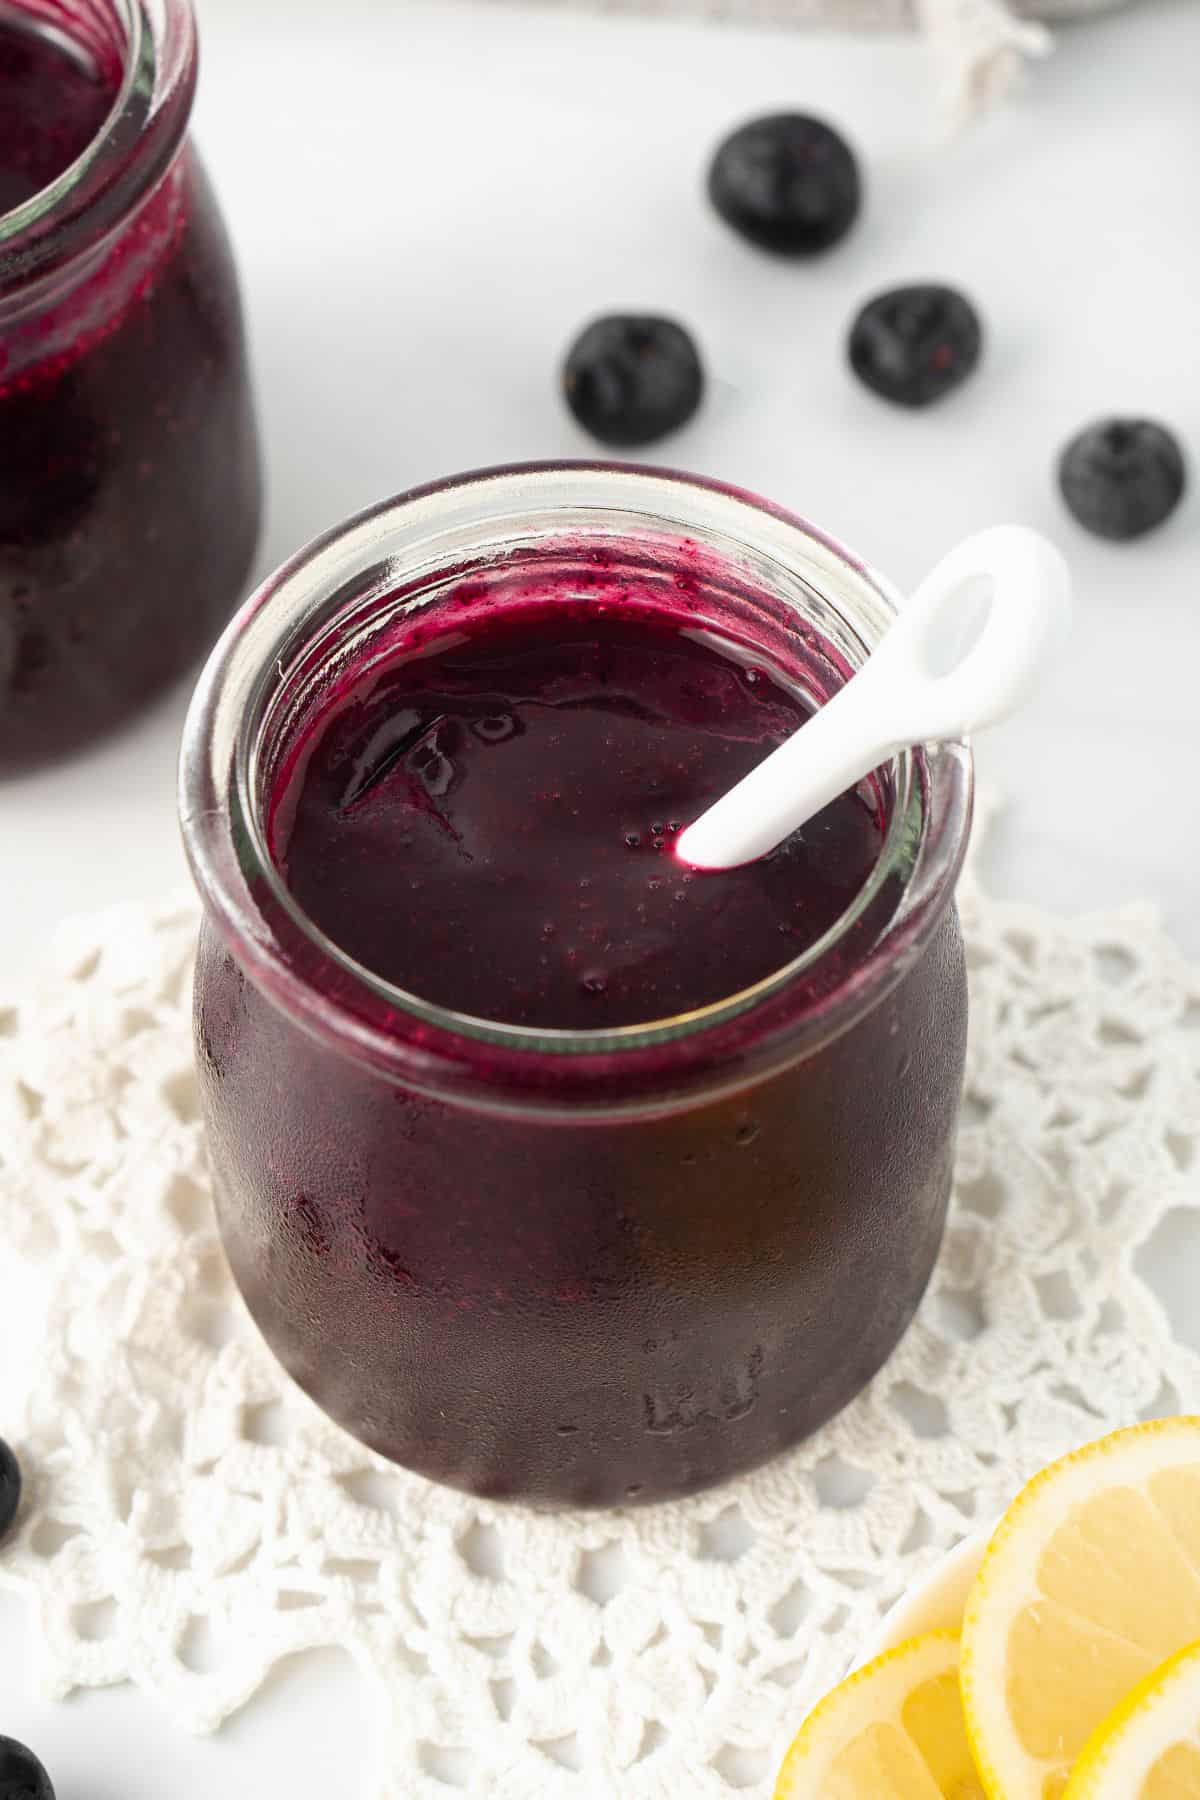 Two small jars of Blueberry Sauce, one with a spoon in it, surrounded by some blueberries and lemon slices.